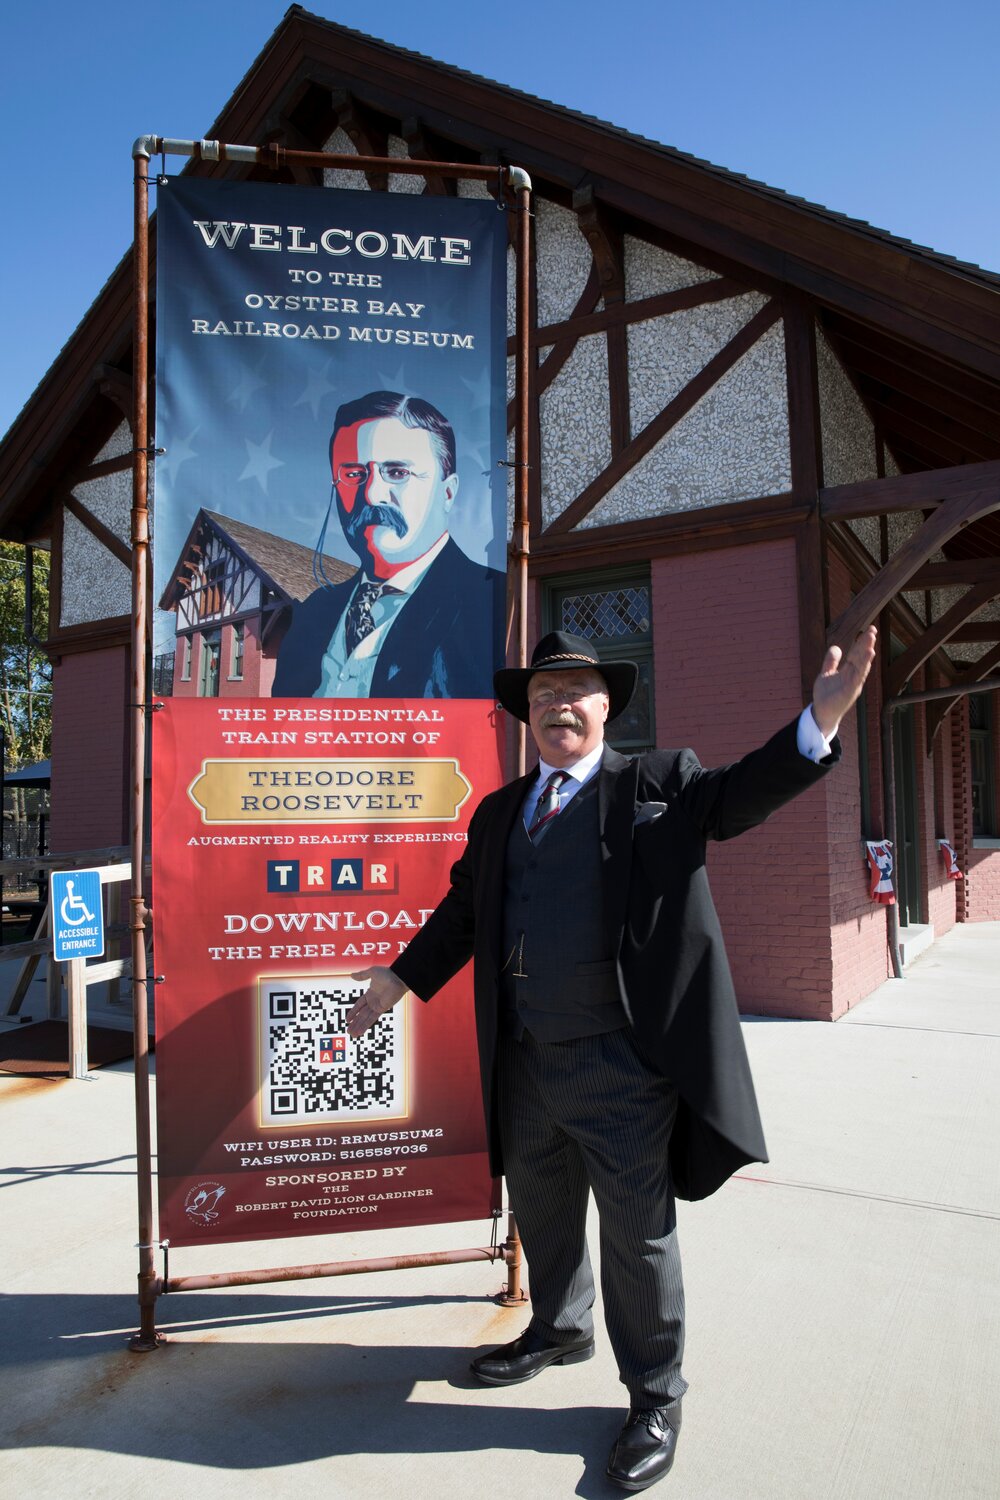 Visitors to the Oyster Bay Railroad Museum will get the chance to learn about Theodore Roosevelt’s life in Oyster Bay from the president himself.